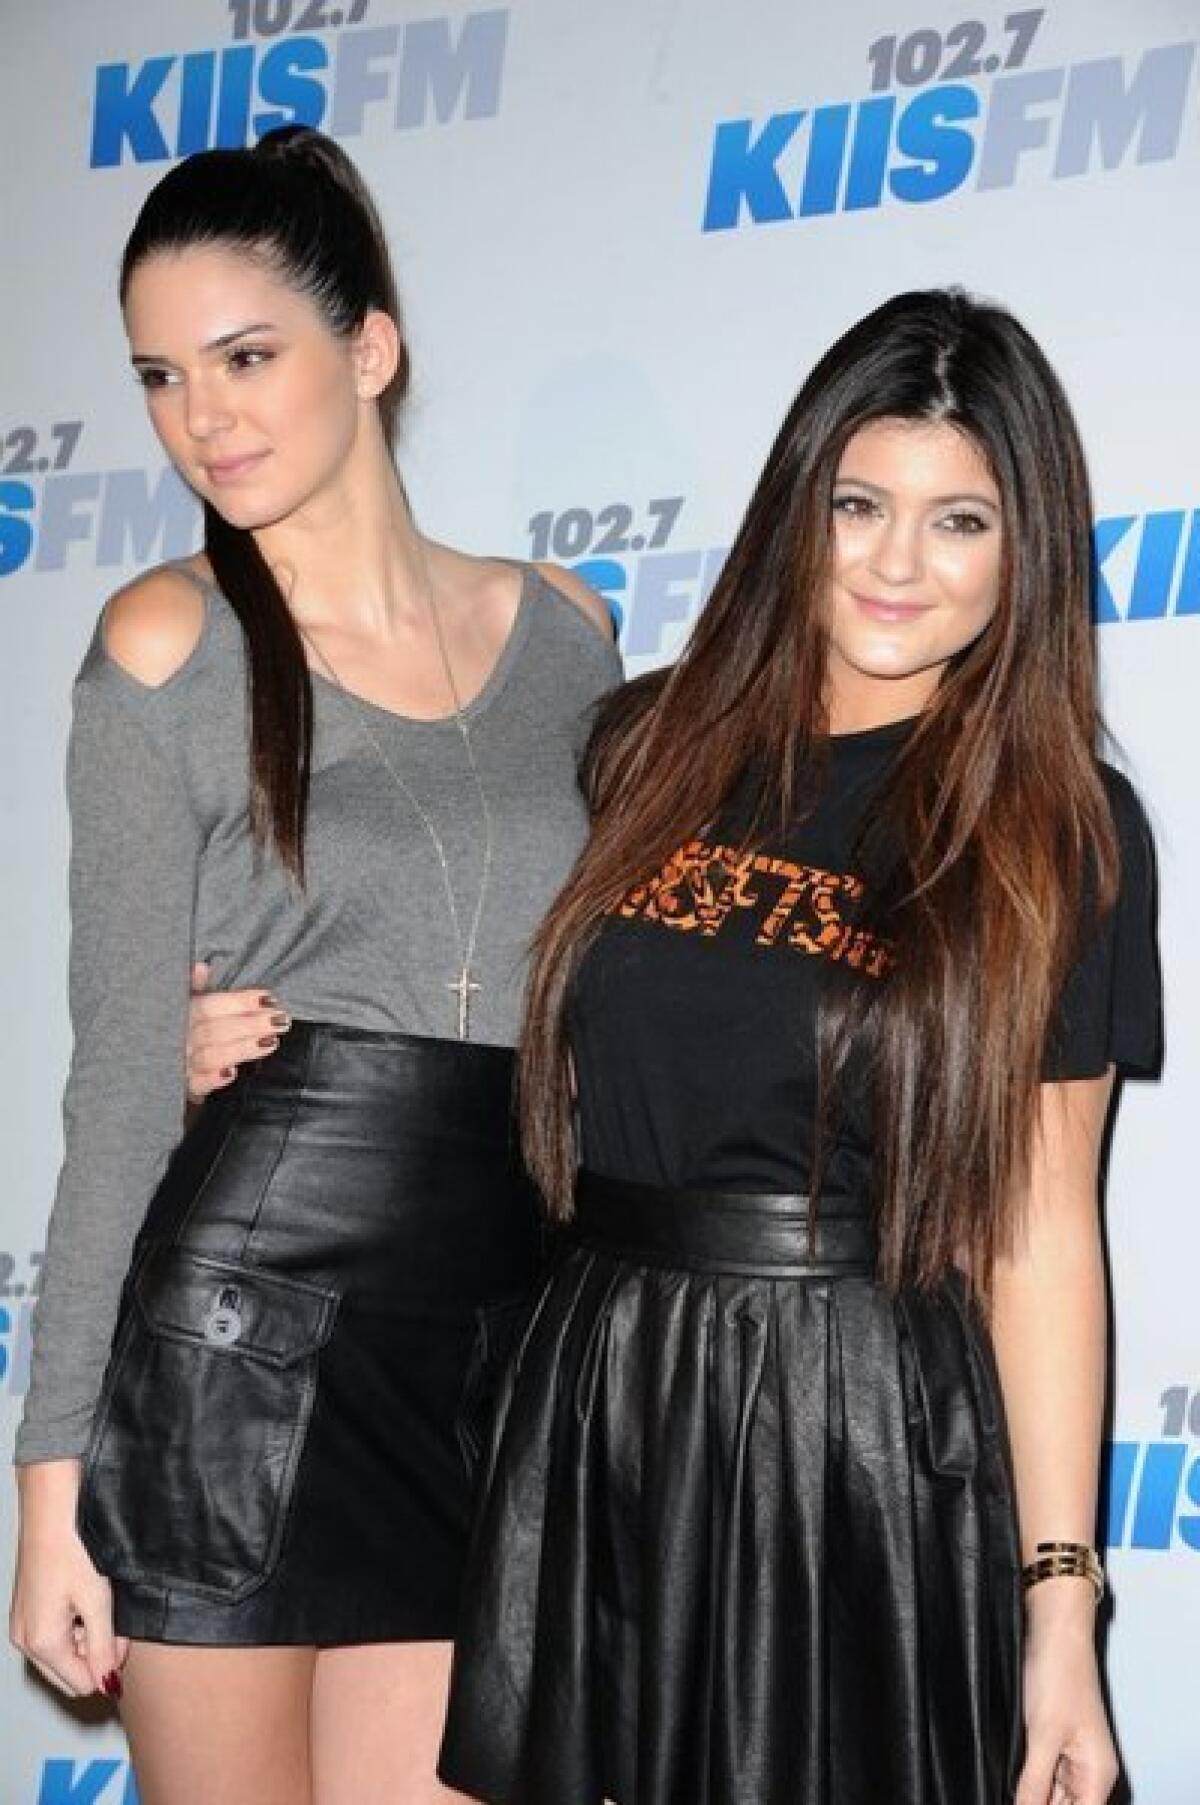 Kendall Jenner, left, and Kylie Jenner strike a pose at a holiday Jingle Ball at the Nokia Theatre this month.